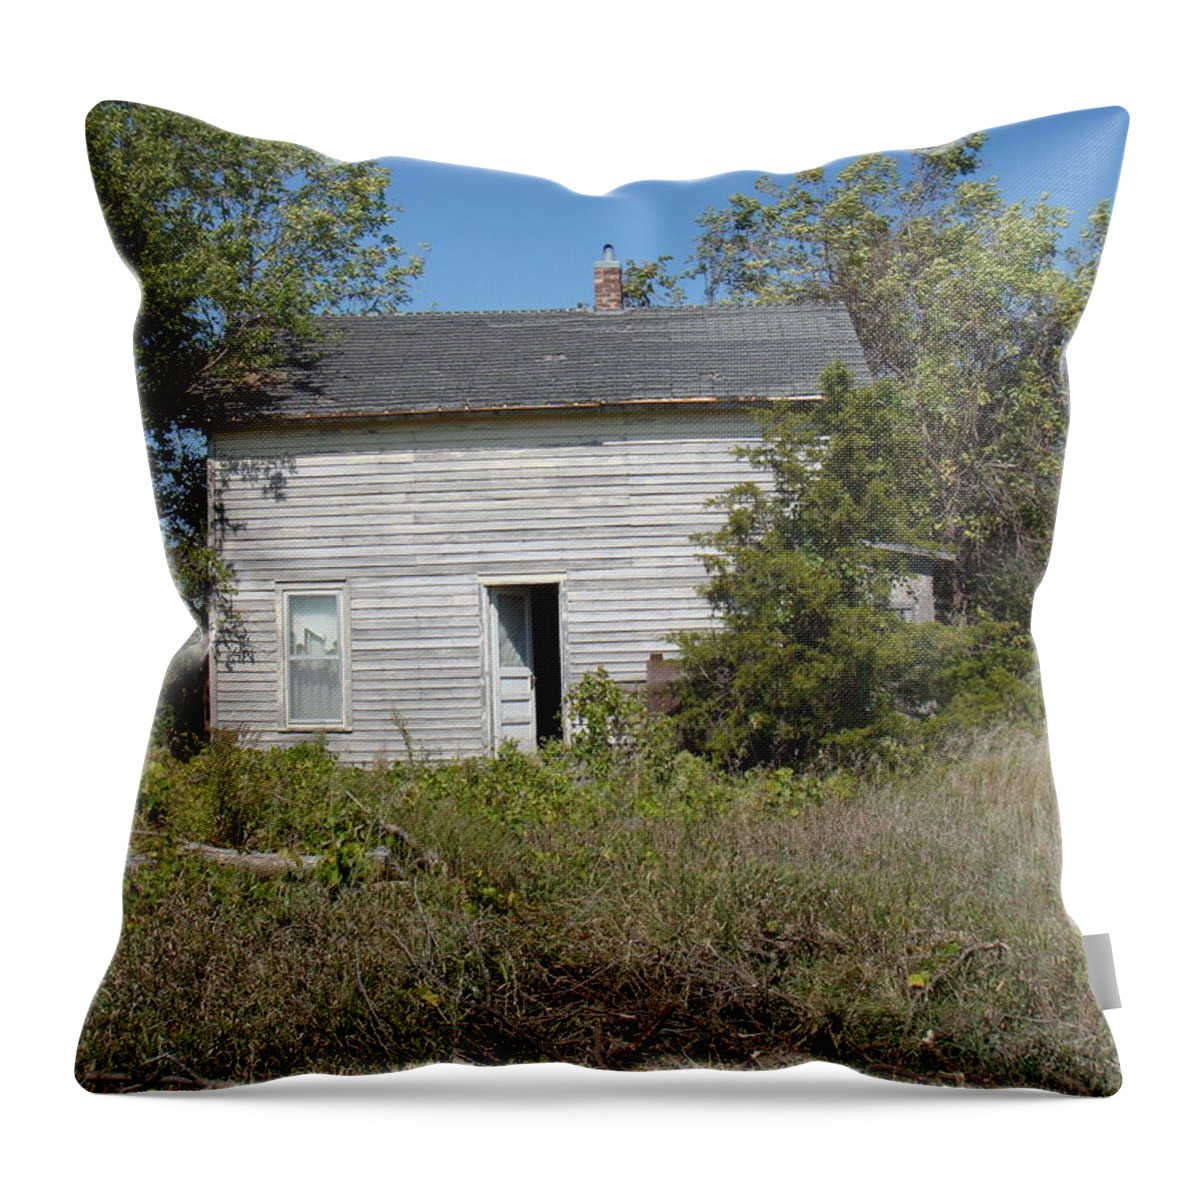 Abandoned Throw Pillow featuring the photograph Abandoned by Bonfire Photography